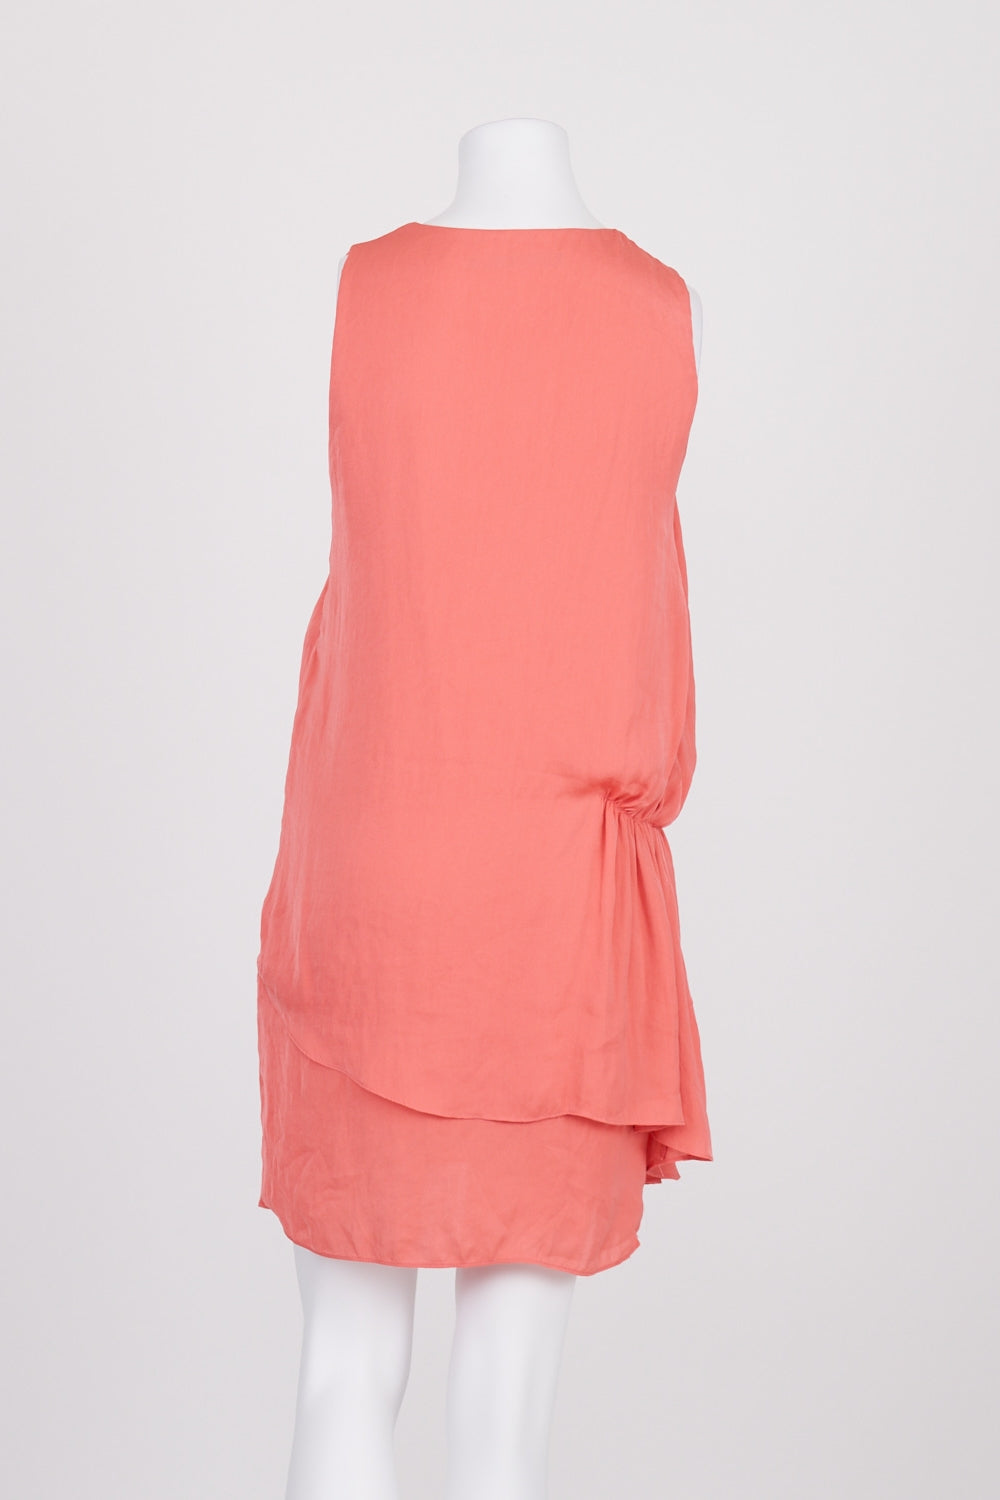 ZARA Coral Ruched Side Dress S